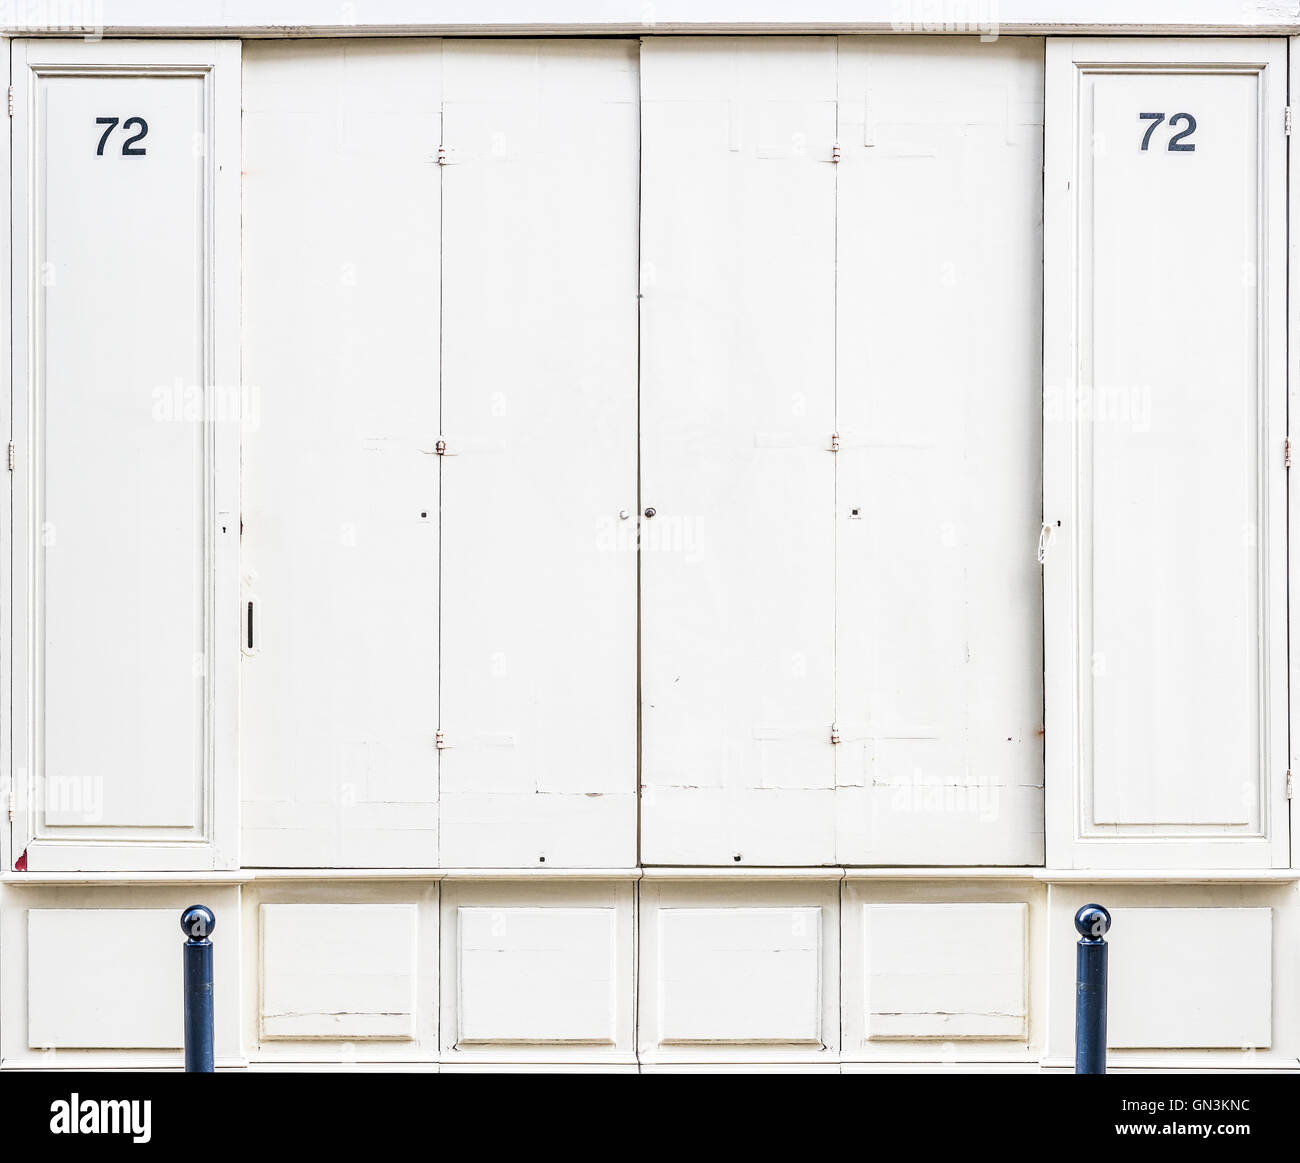 Antique white wooden doors of a store with a number 72 in both sides. Antique european style. Stock Photo